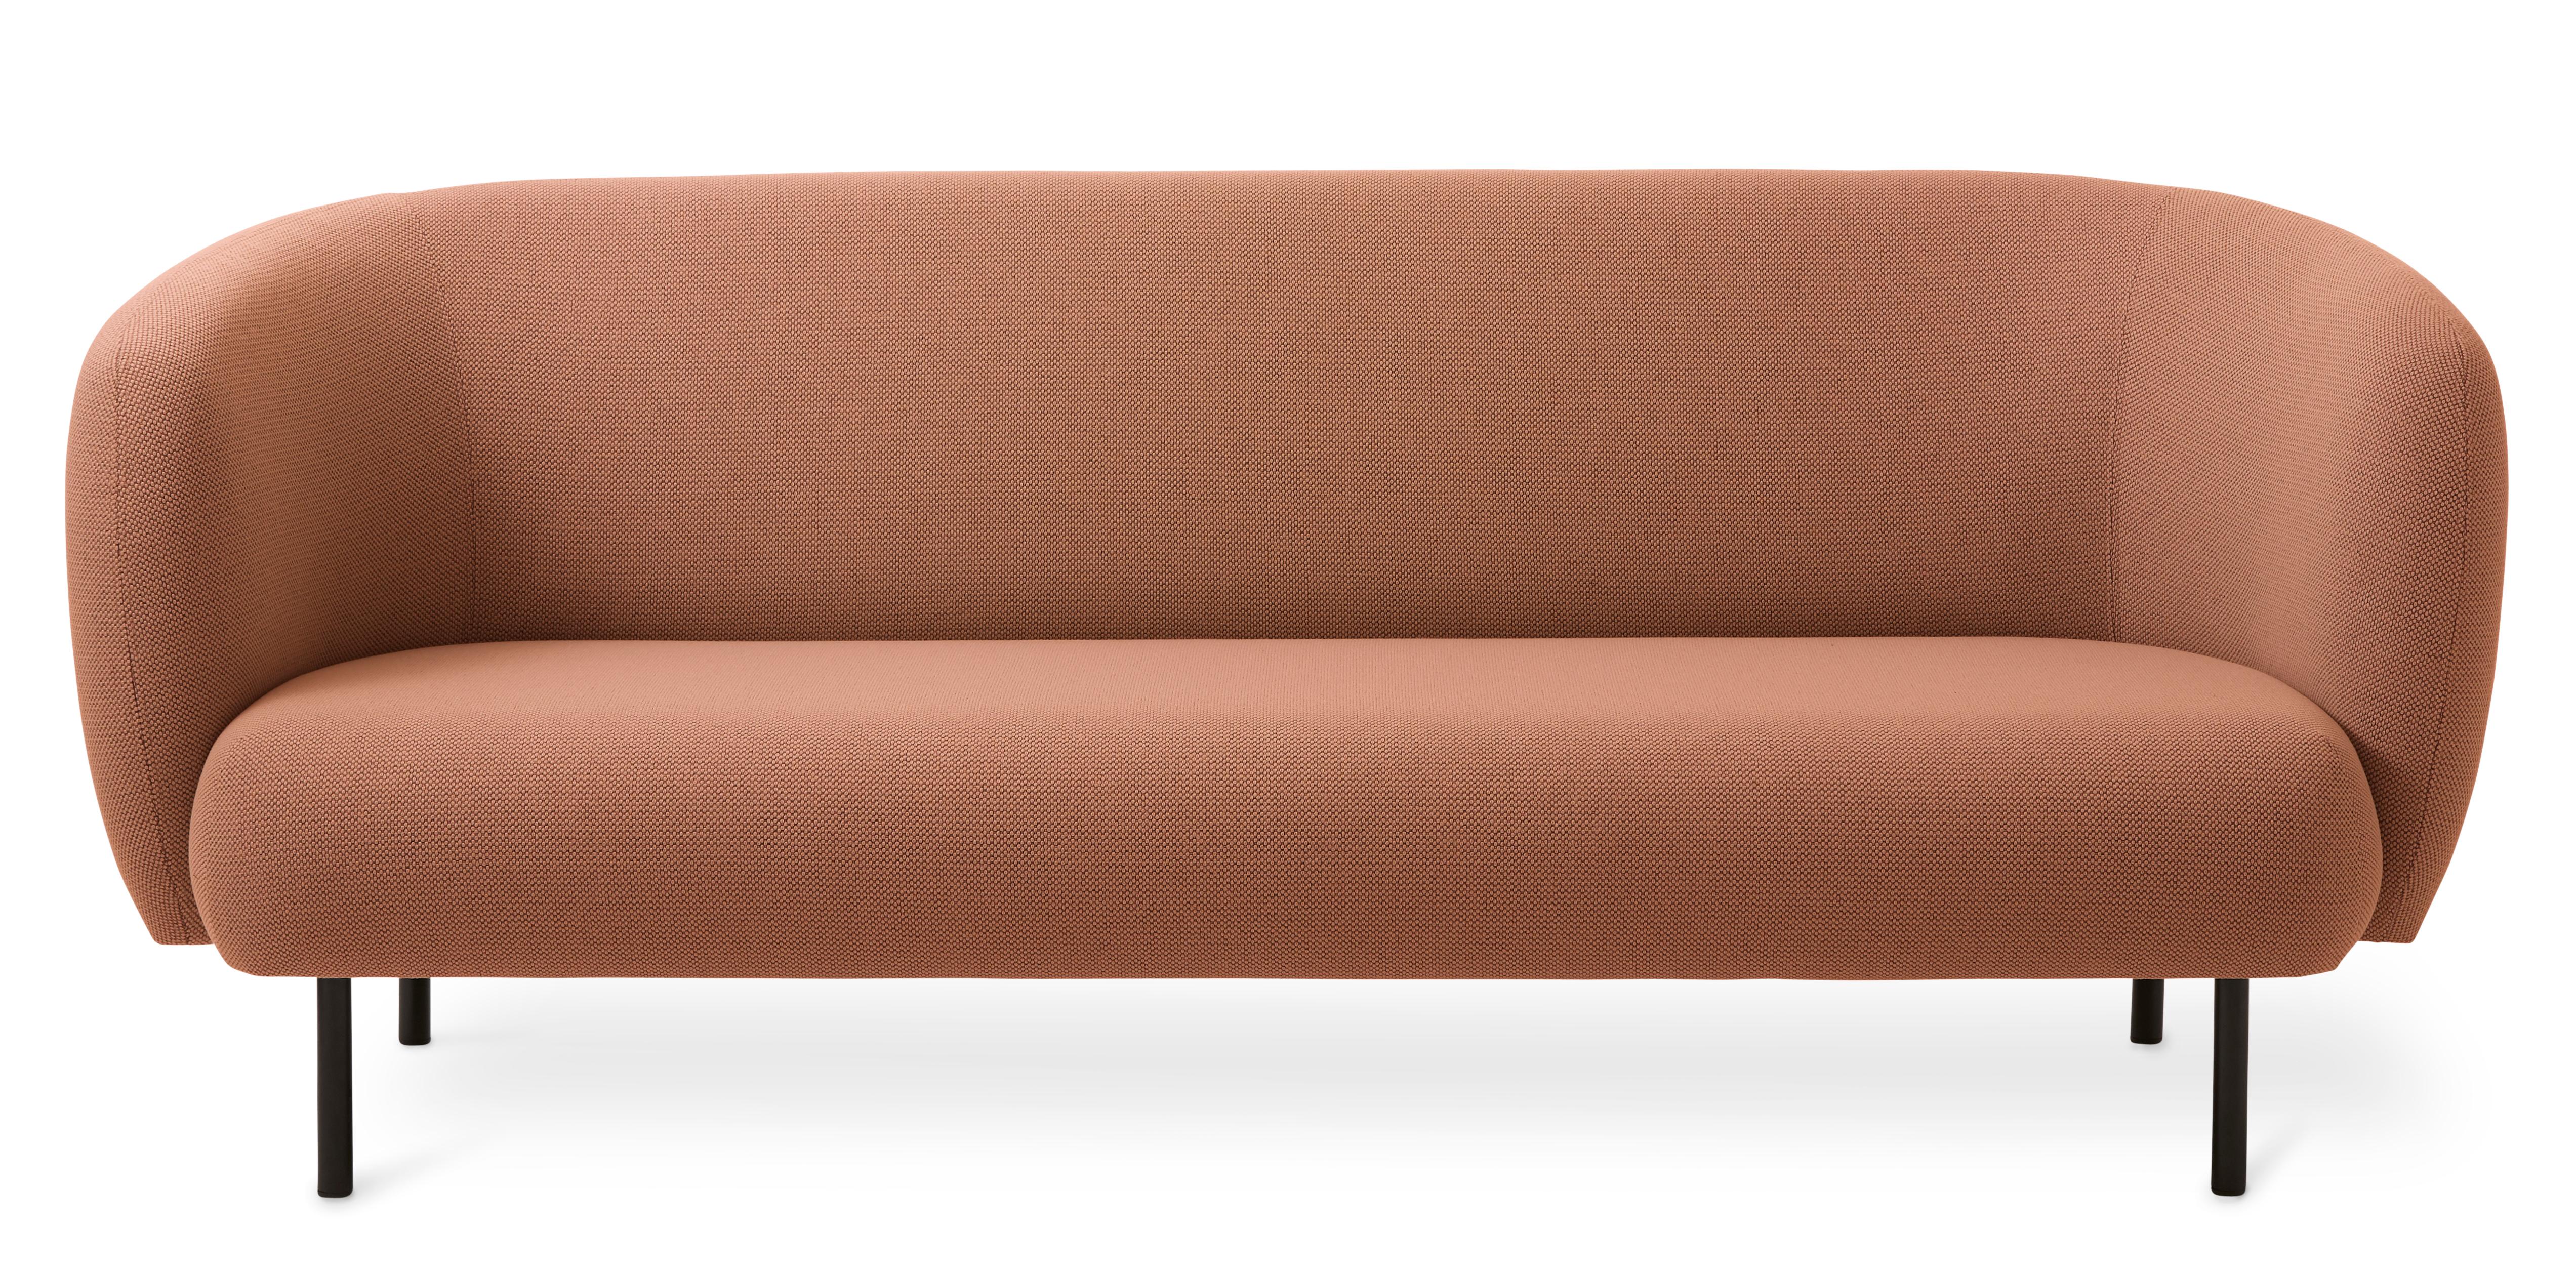 For Sale: Pink (Merit 035) Cape 3-Seat Sofa, by Charlotte Høncke from Warm Nordic